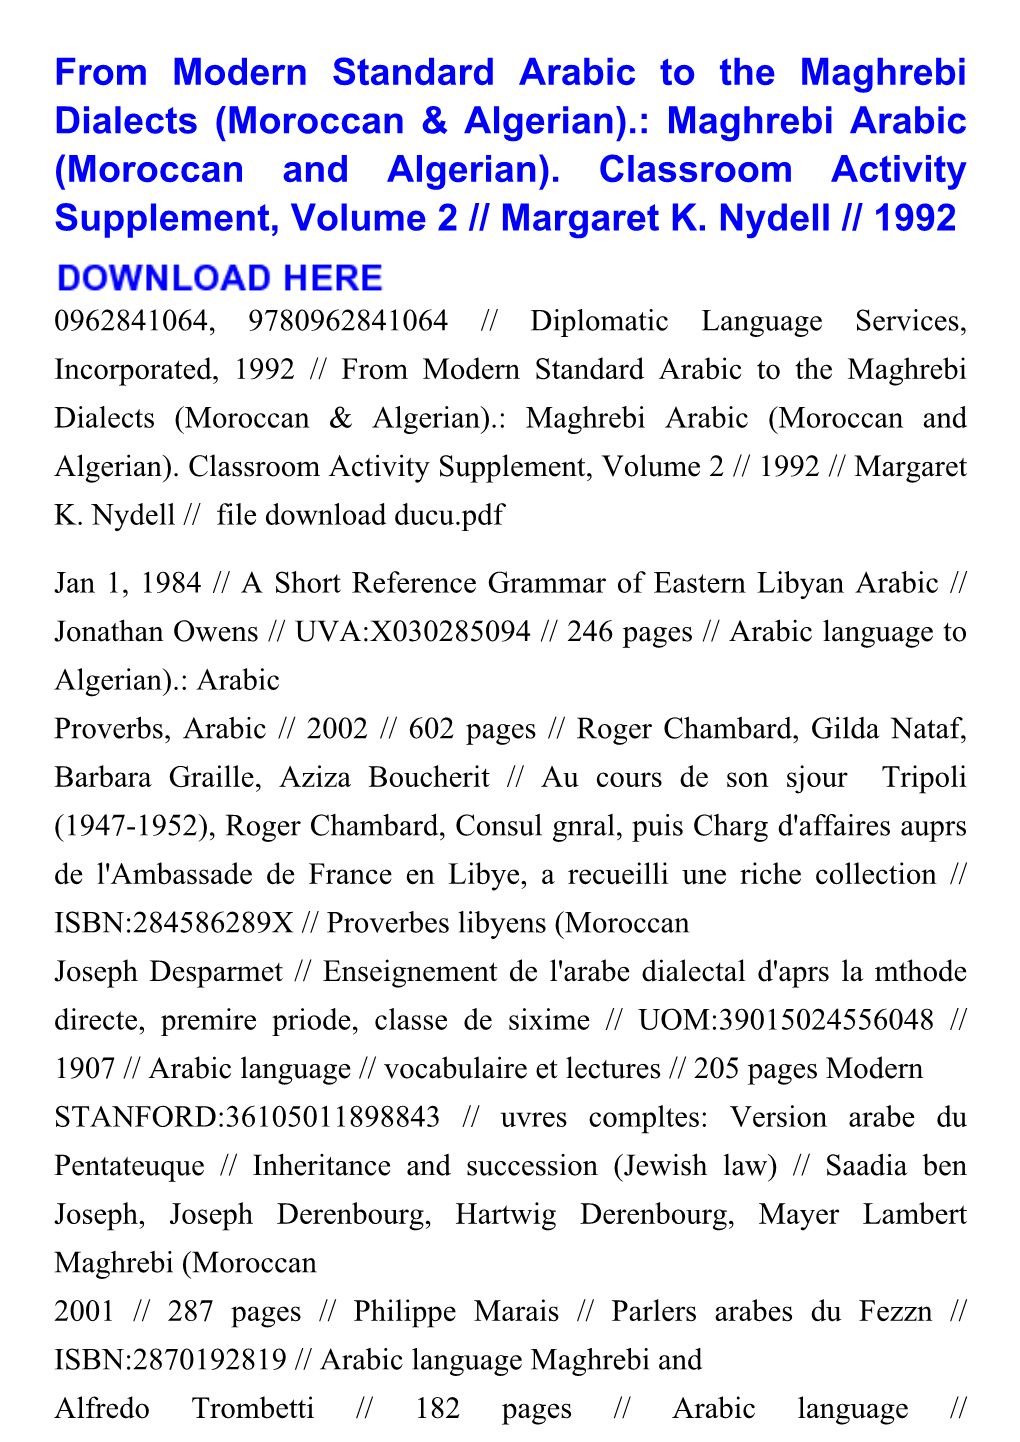 From Modern Standard Arabic to the Maghrebi Dialects (Moroccan & Algerian).: Maghrebi Arabic (Moroccan and Algerian)